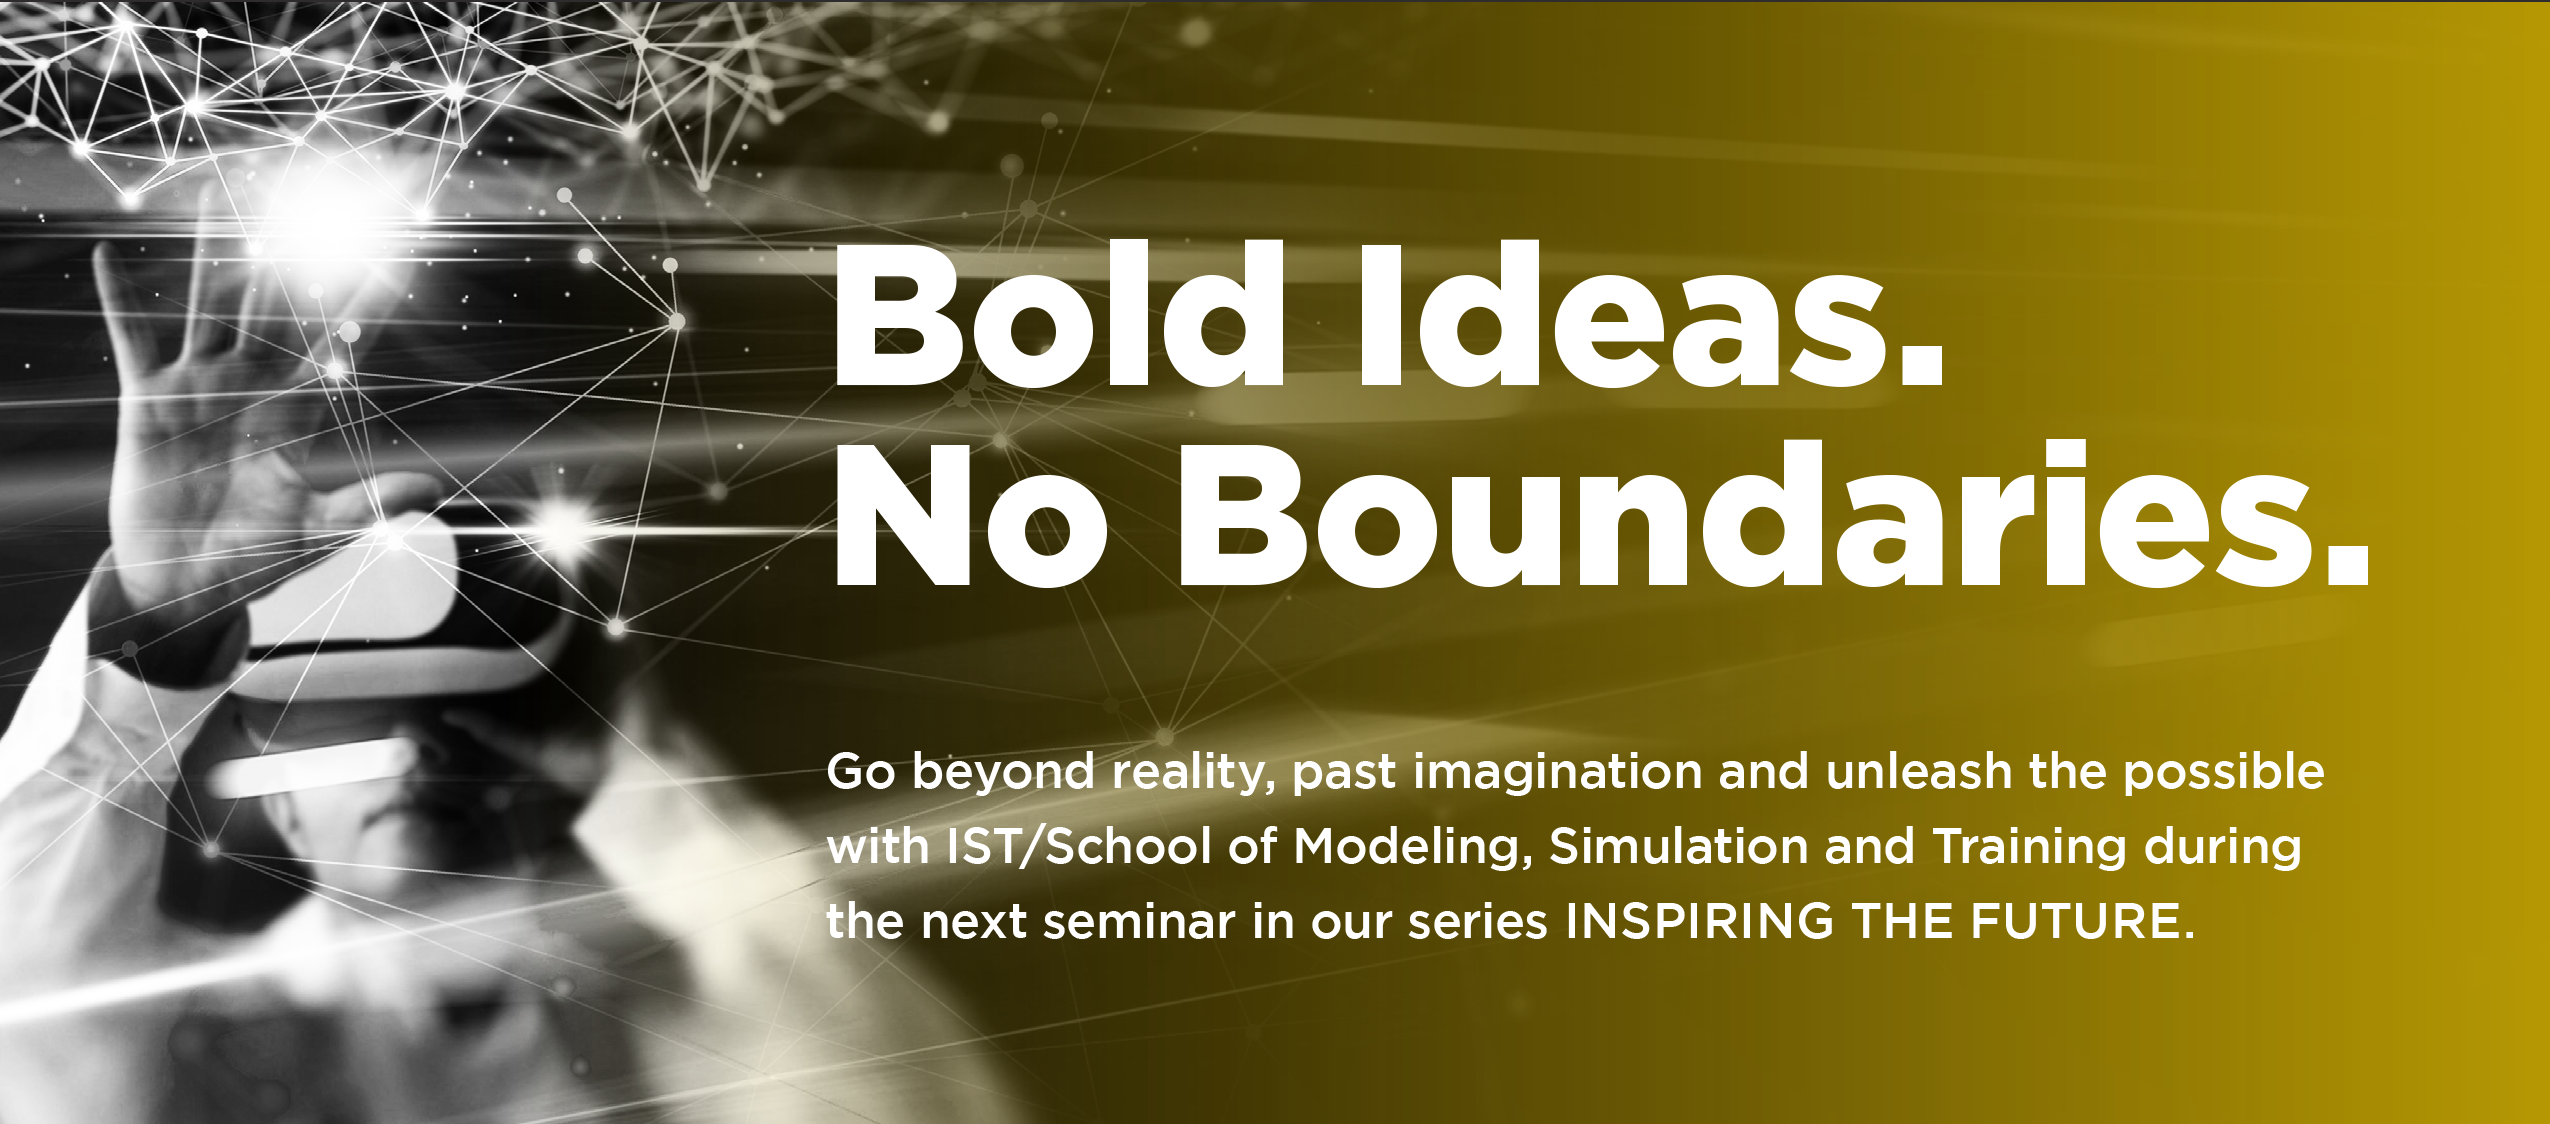 Bold Ideas. No Boundaries. Go beyond reality, past imagination and unleash the possible with IST, School of Modeling, Simulation and Training during the next seminar in our series: INSPIRING THE FUTURE.